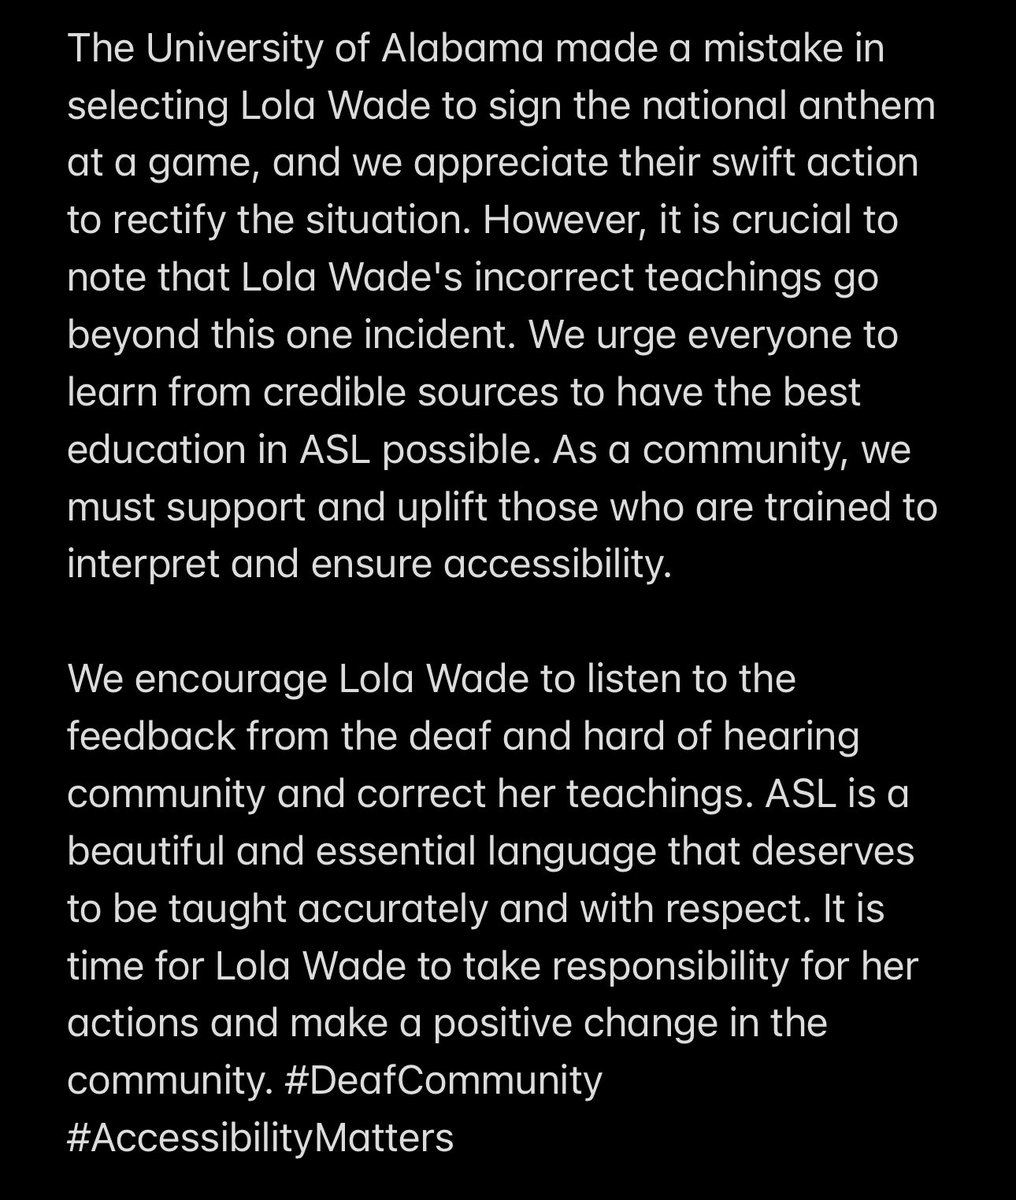 Concerned about the recent sign language interpretation at @AlabamaAthletics game by Lola Wade. As a member of the deaf community, having certified interpreters is essential for accessibility. Let's uplift and support qualified interpreters. #DeafCommunity #AccessibilityMatters